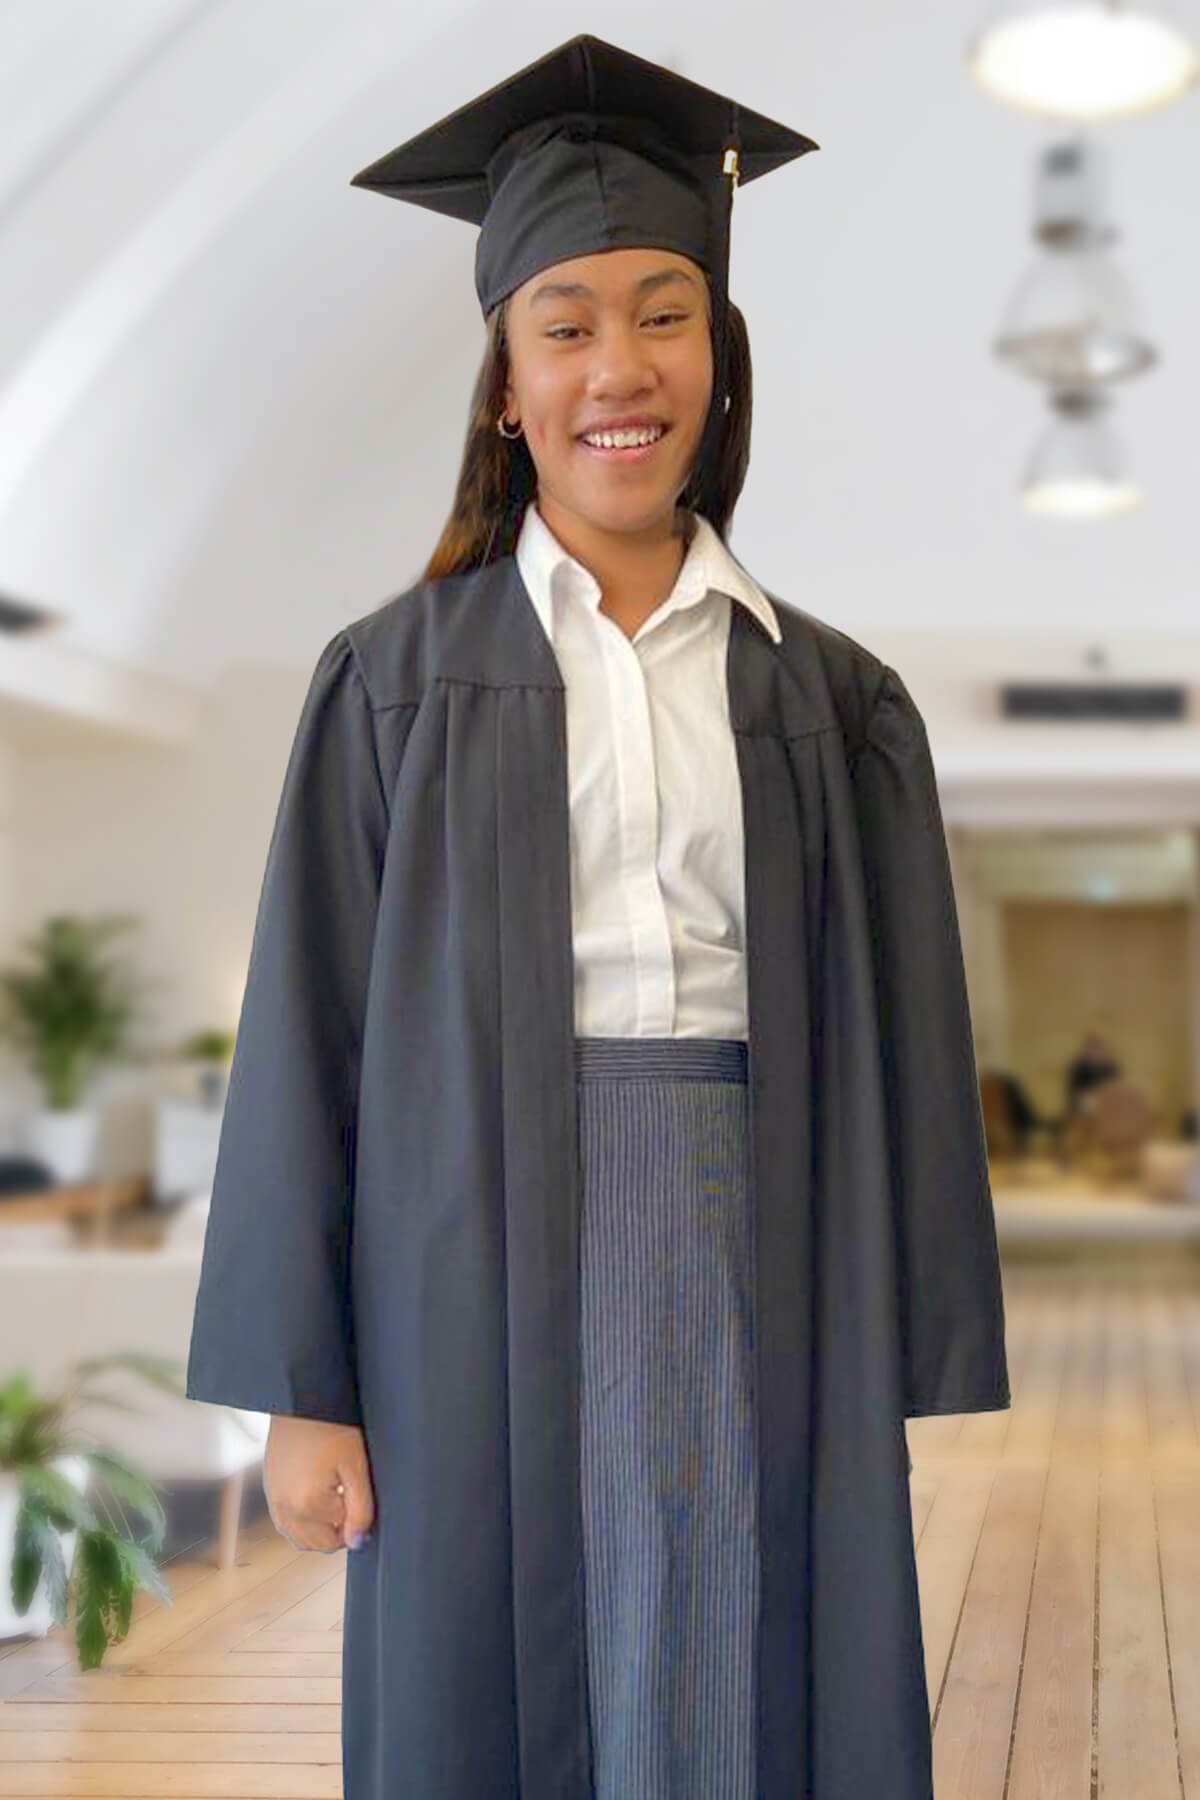 Genderspecific grad gowns shifting